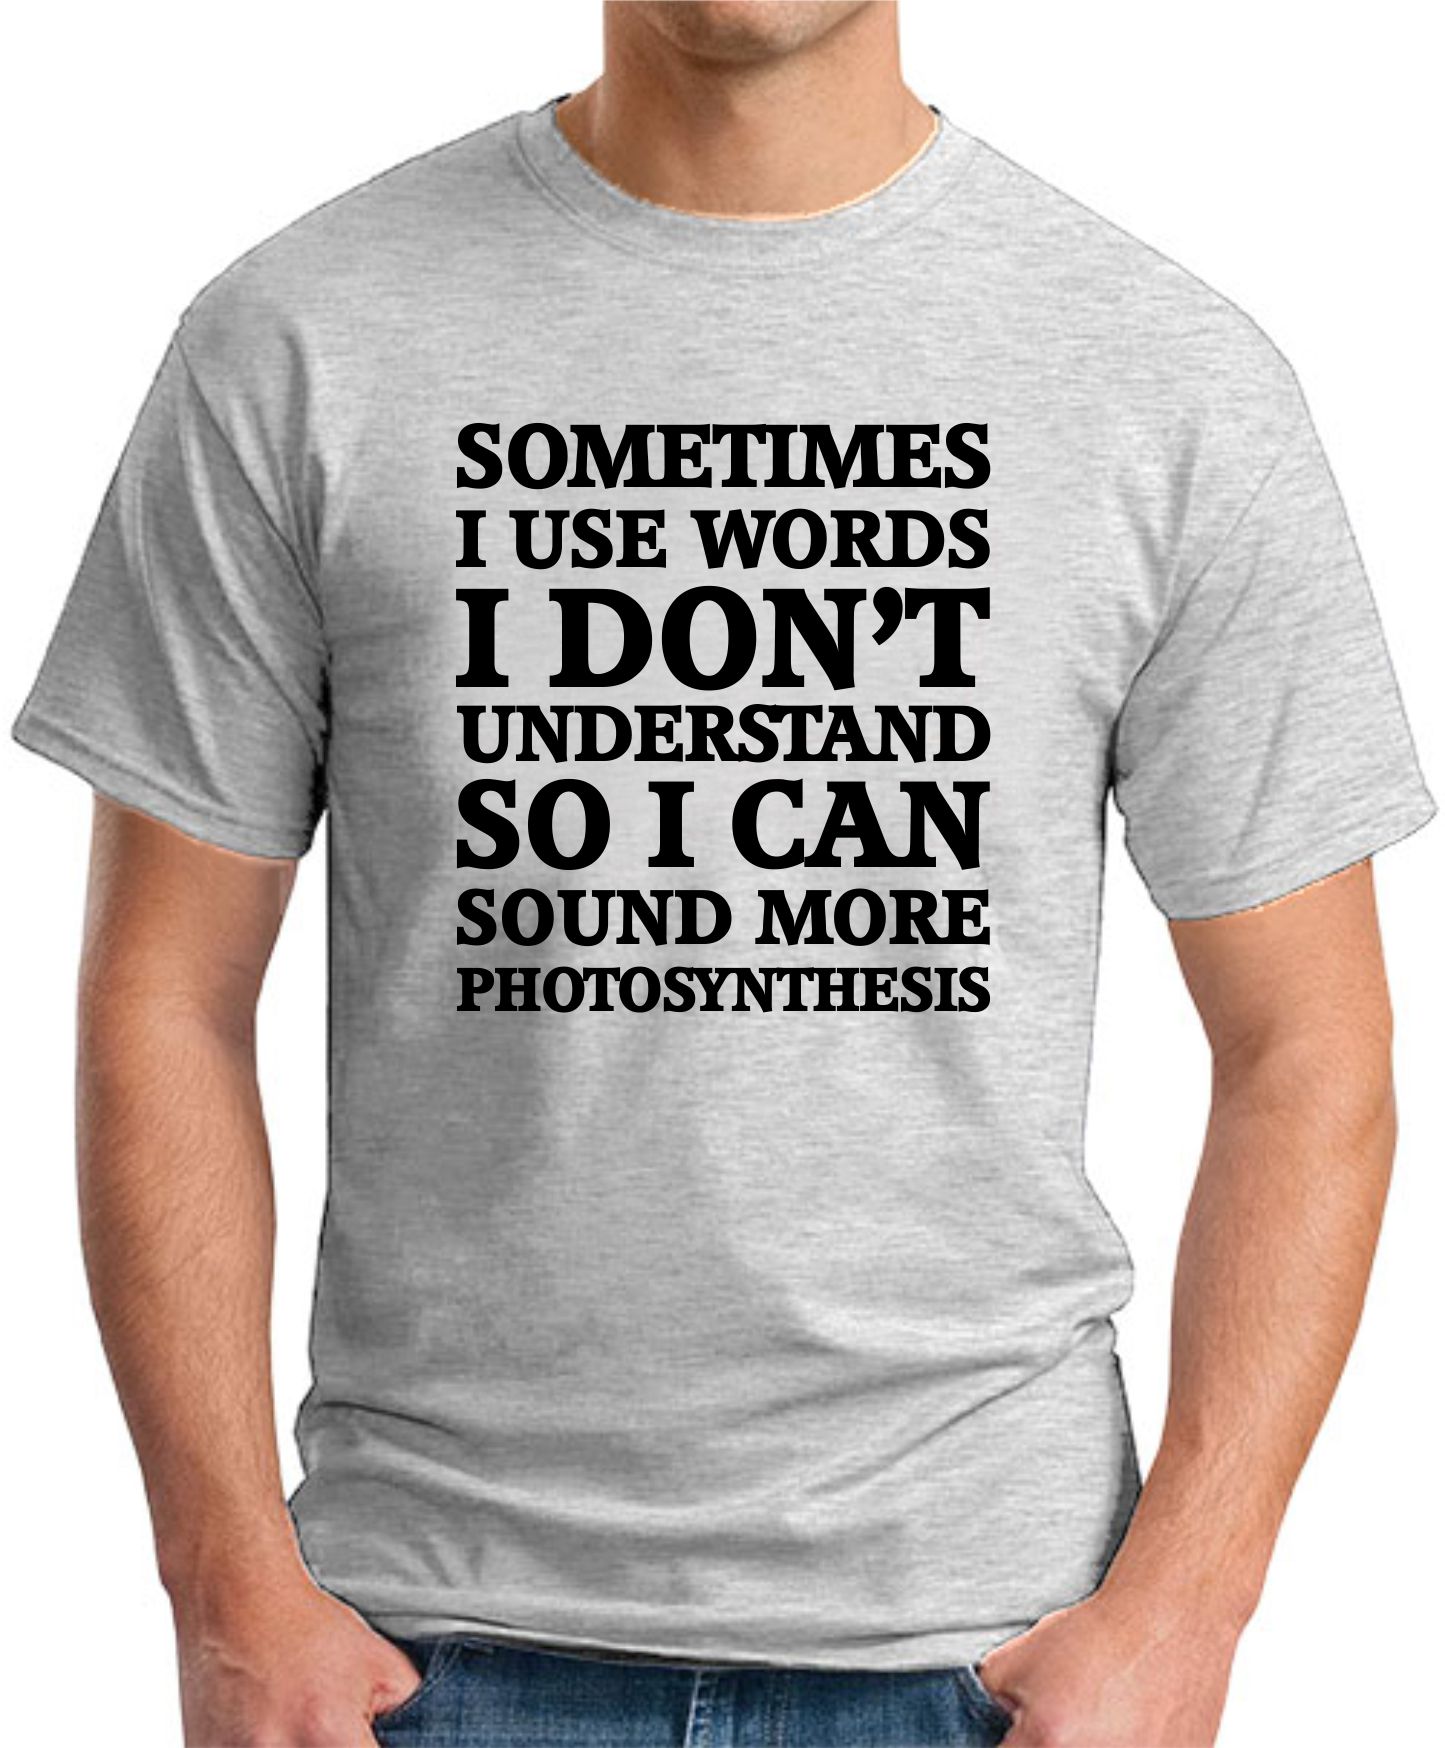 SOMETIMES I USE WORDS I DON'T UNDERSTAND T-SHIRT - GeekyTees